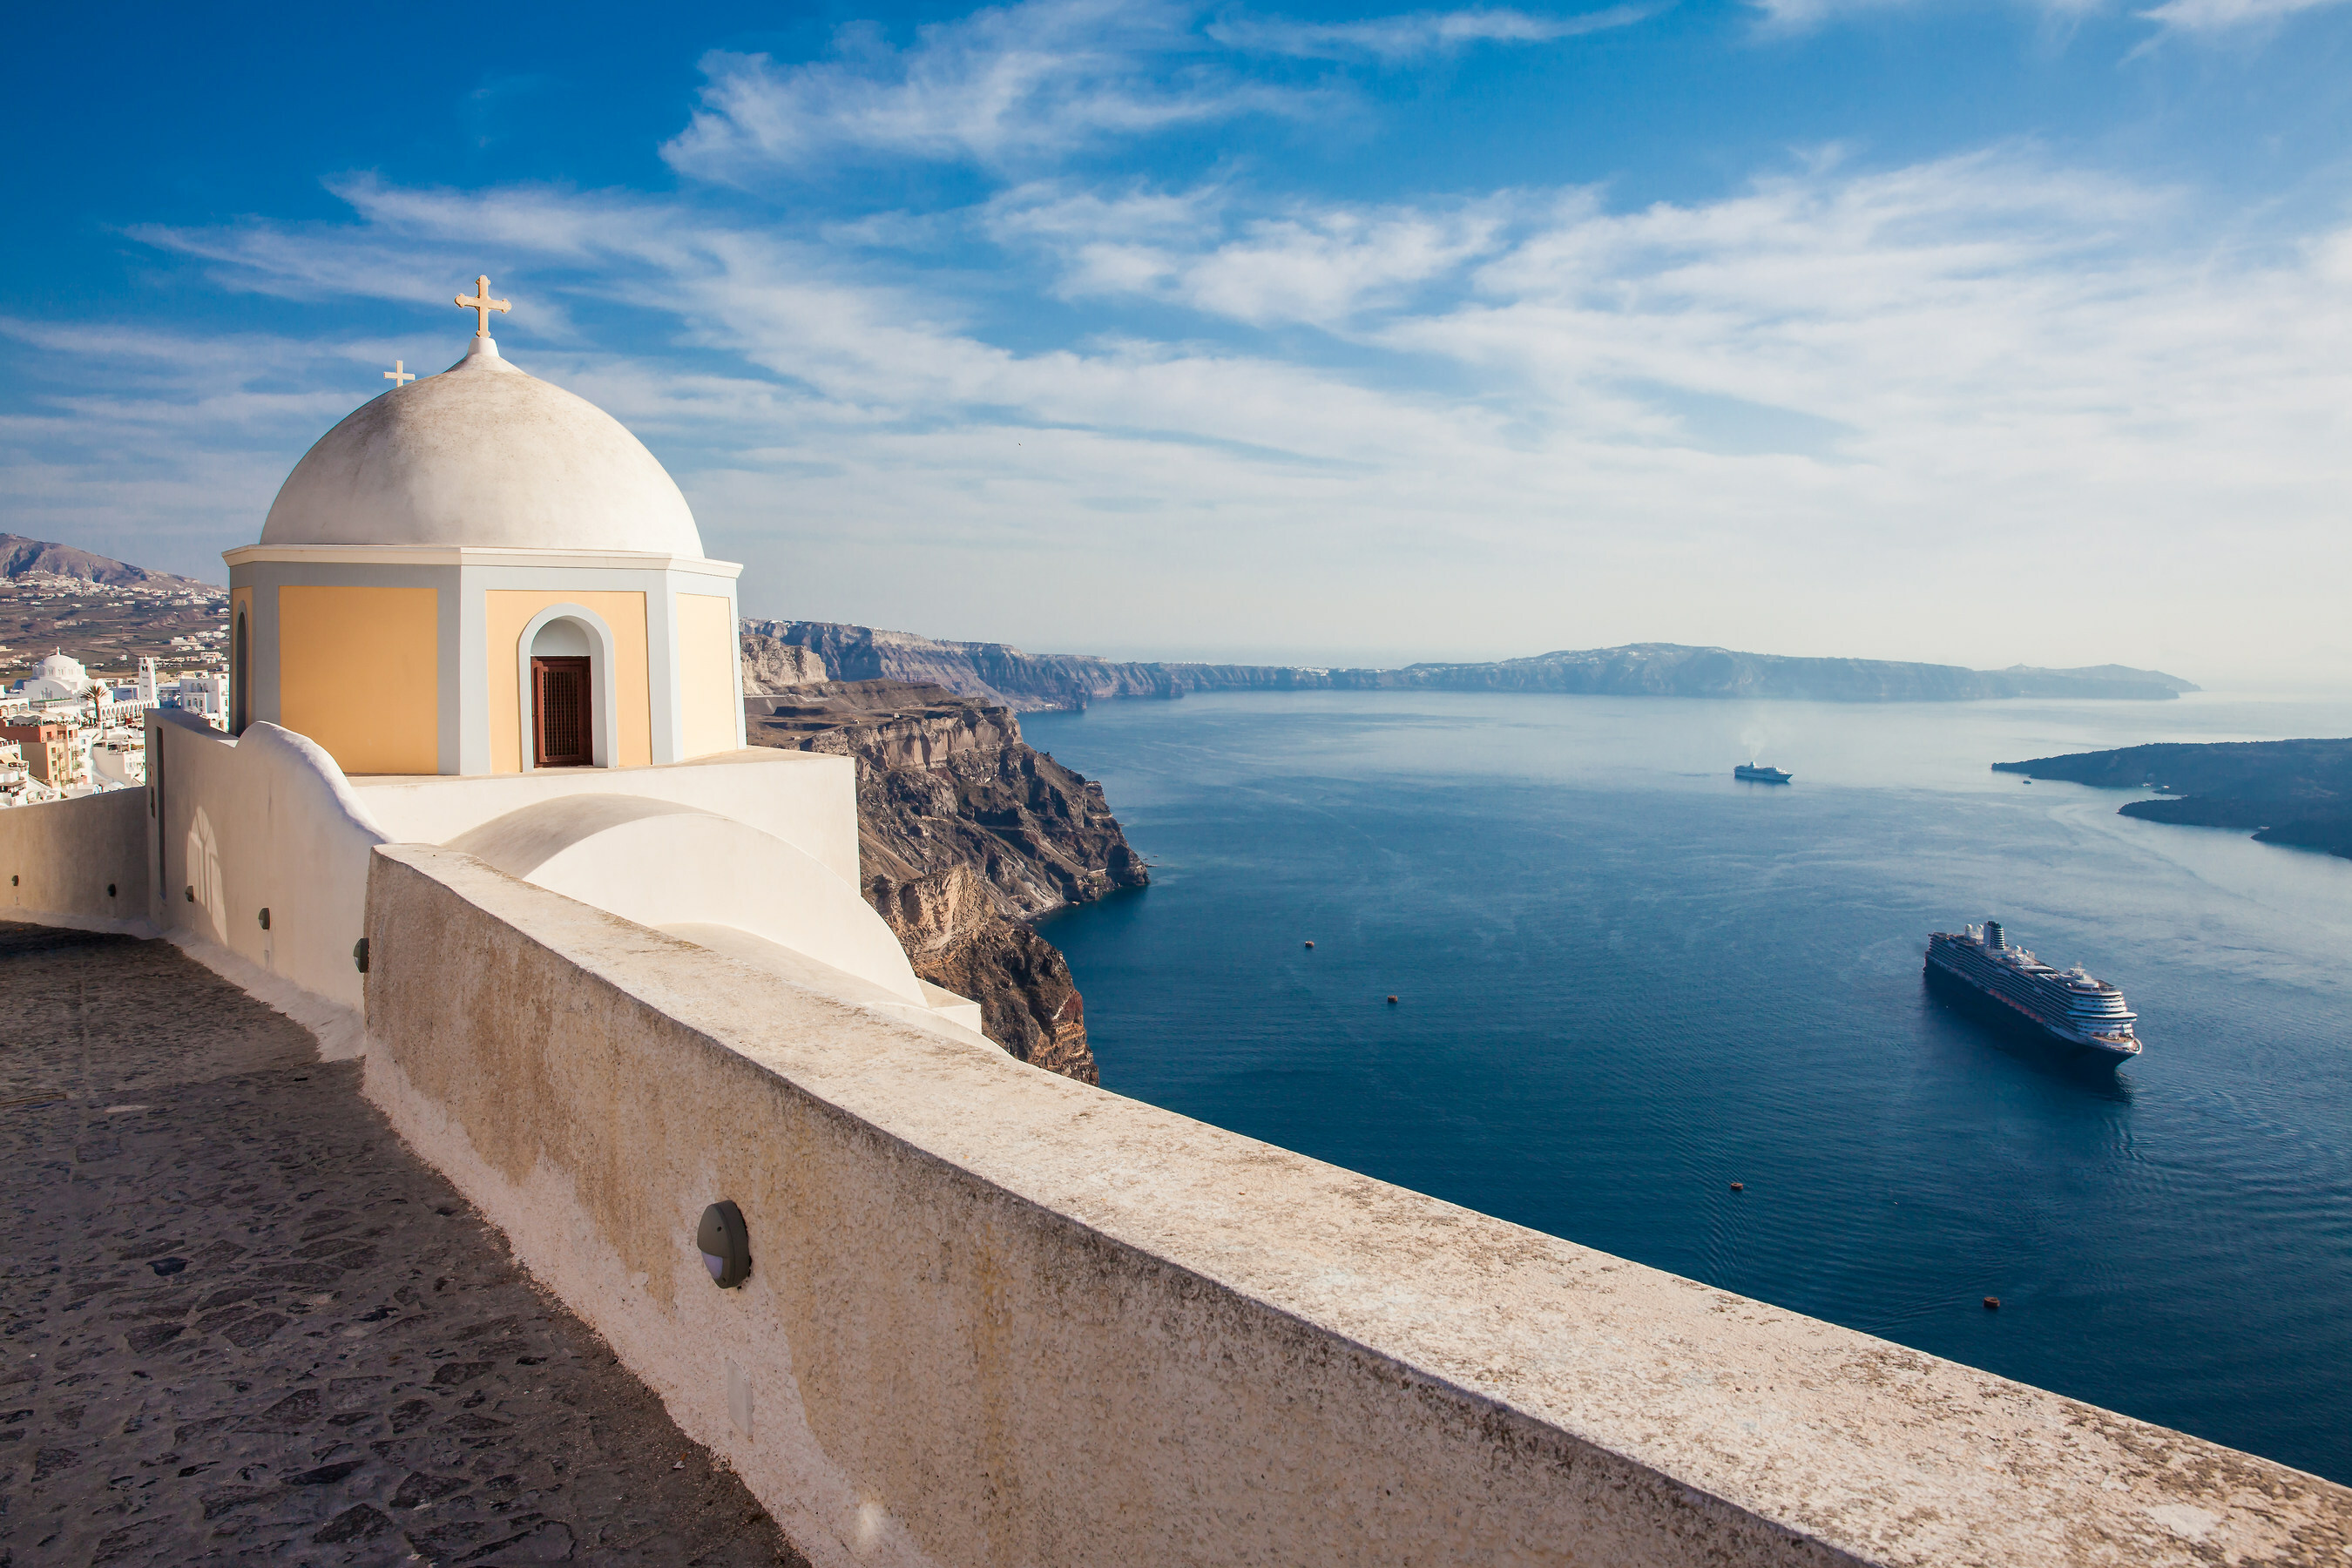 Holland America Line Introduces New 'National Geographic Day Tours' to Mediterranean Cruises. Immersive, sustainable tours in Greece, Spain, Turkey and Italy - Santorini, Greece  (Image at LateCruiseNews.com - June 2023)